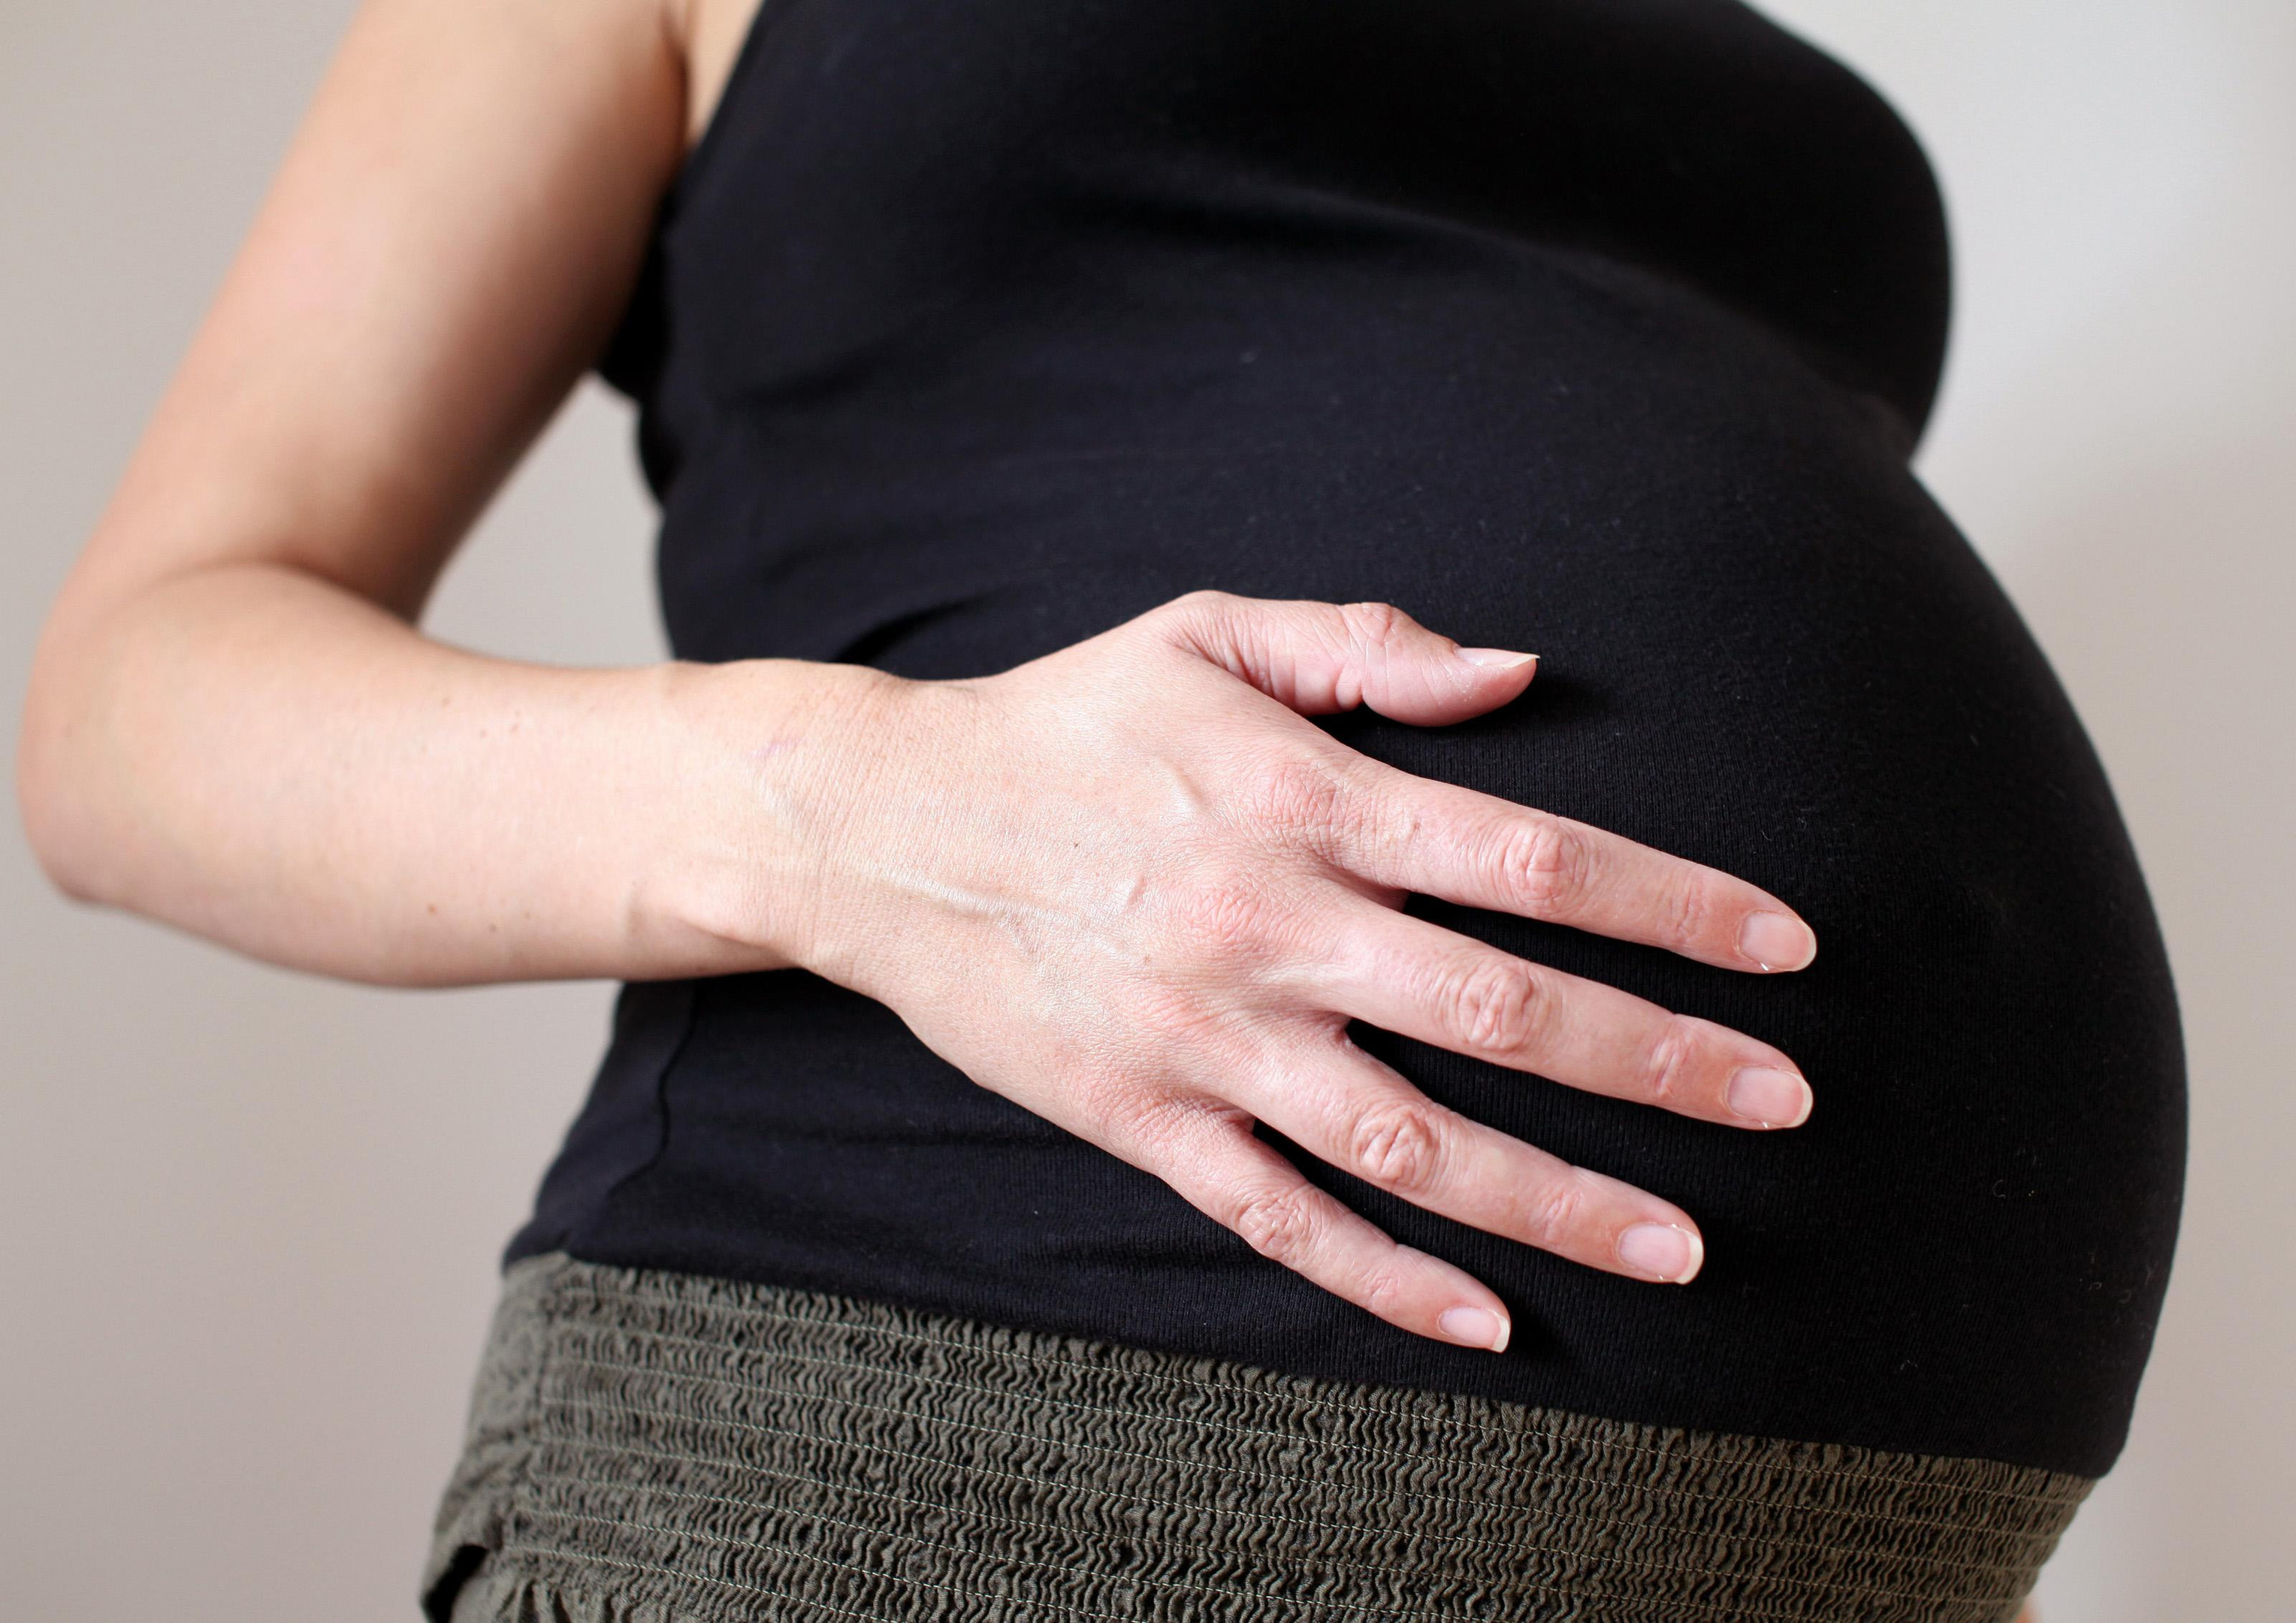 Women are offered counselling and support if they agree to try to avoid pregnancy.